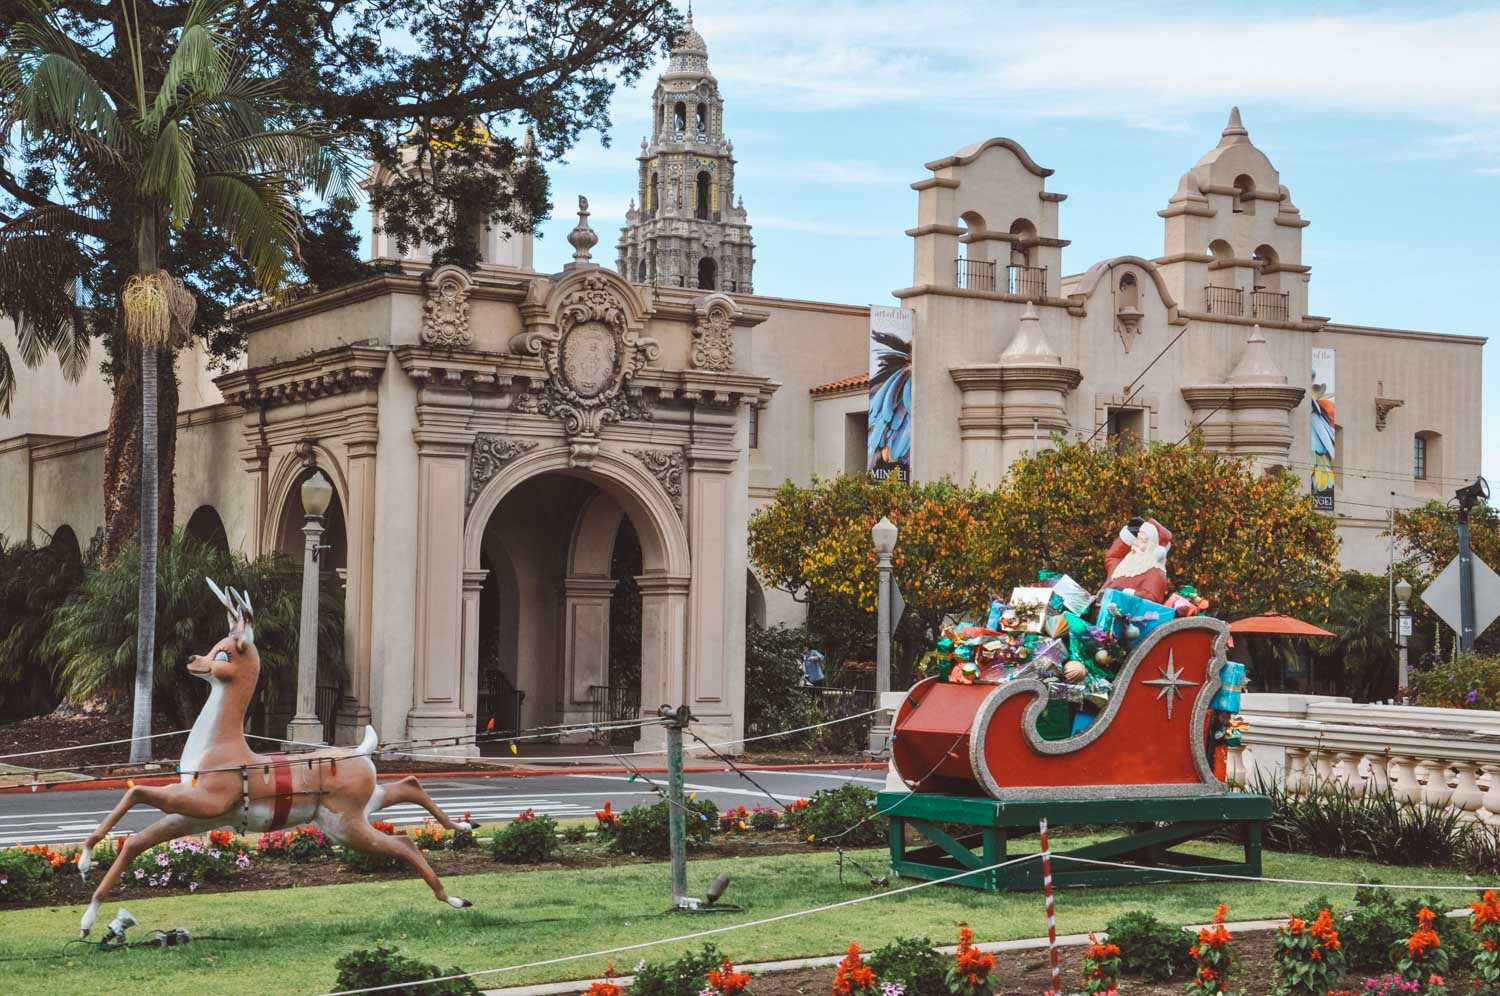 Christmas decorations at Balboa Park in San Diego